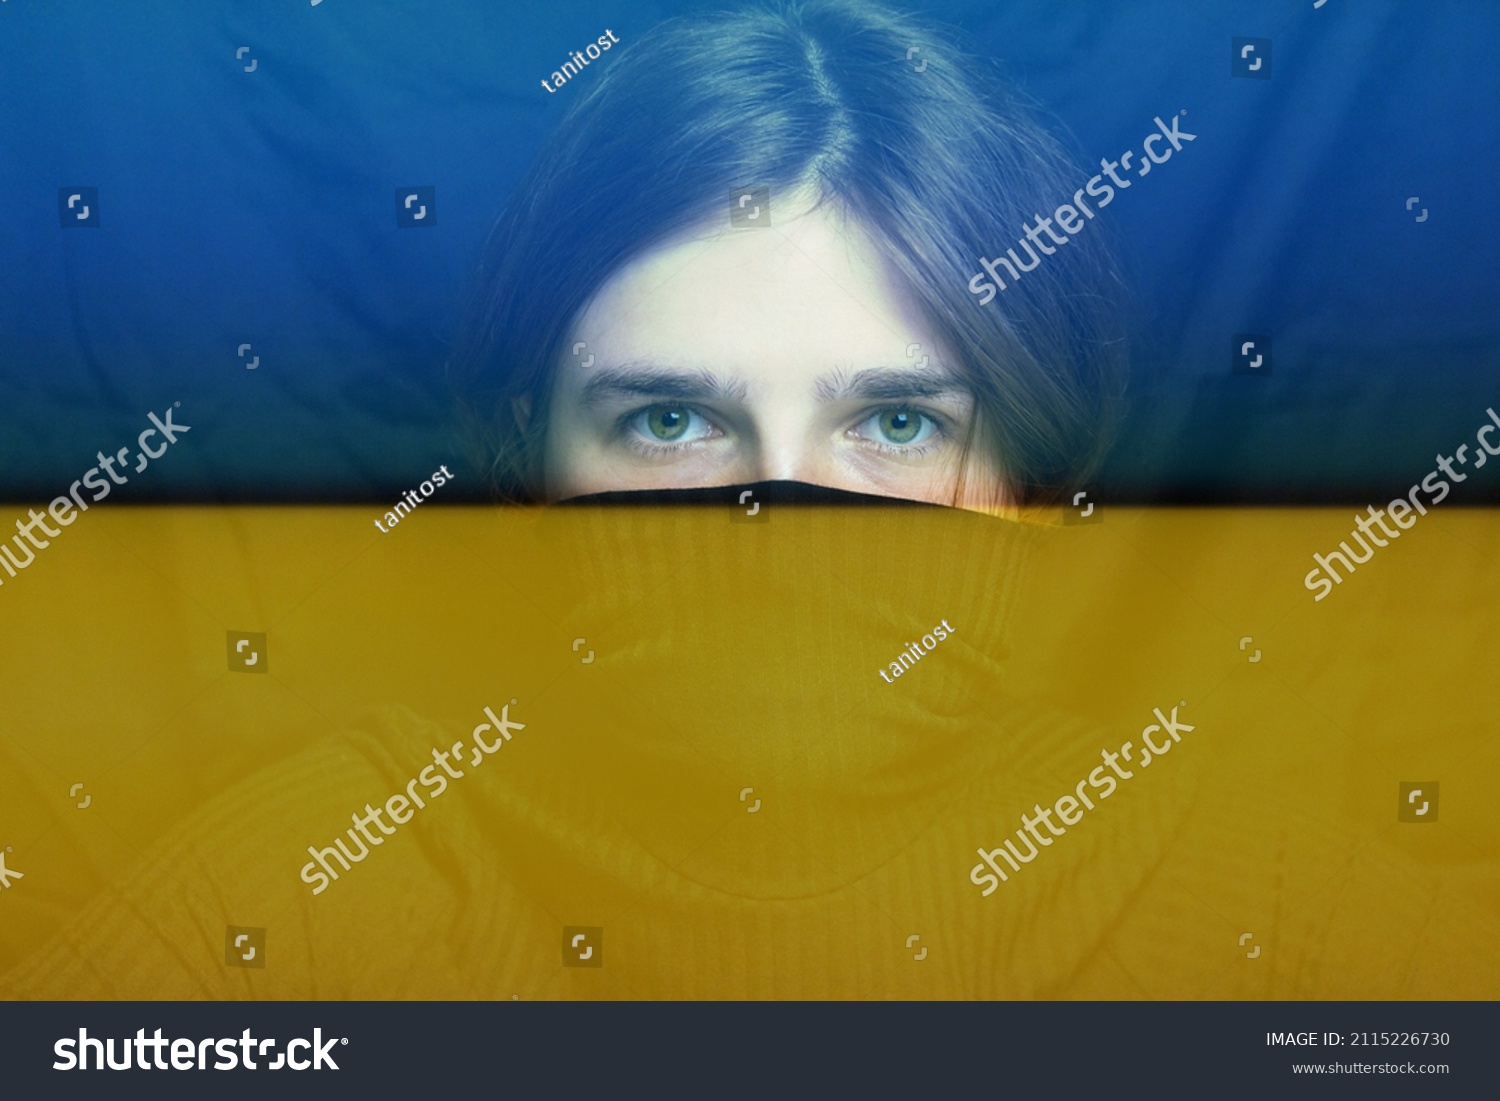 War between Russia and Ukraine. Young woman with sad sight looking at camera. Art portrait. Mental health concept. Face of depression. Caucasian woman with green eyes on black background. #2115226730